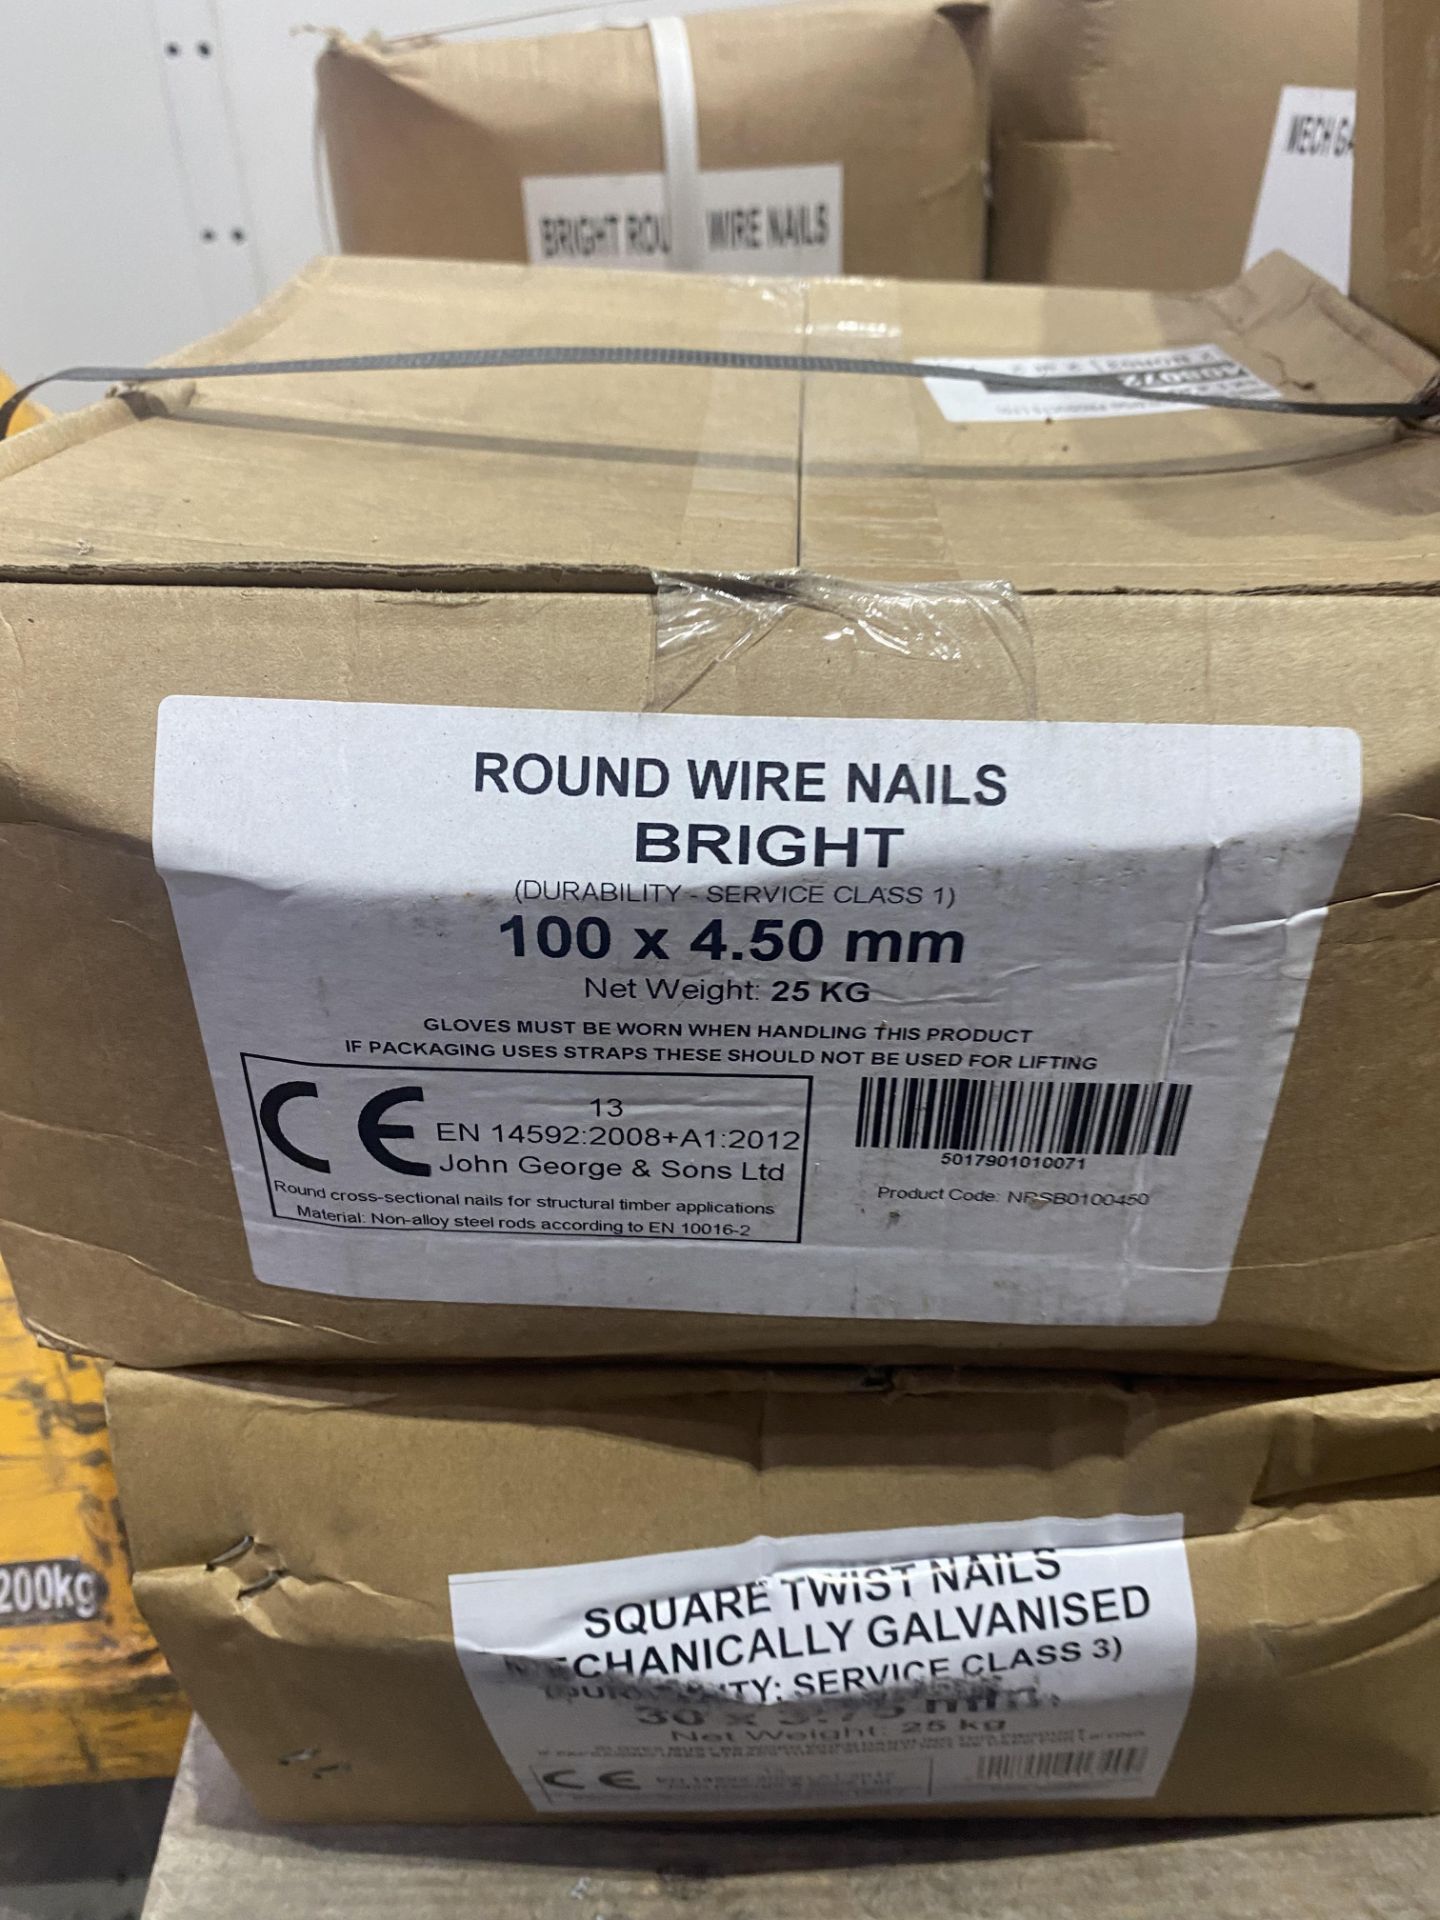 15 x Boxes Of Various Nails Inc. Wire Nails, Clout Nails, Shank Nails Etc As Seen In Photos - Image 12 of 20